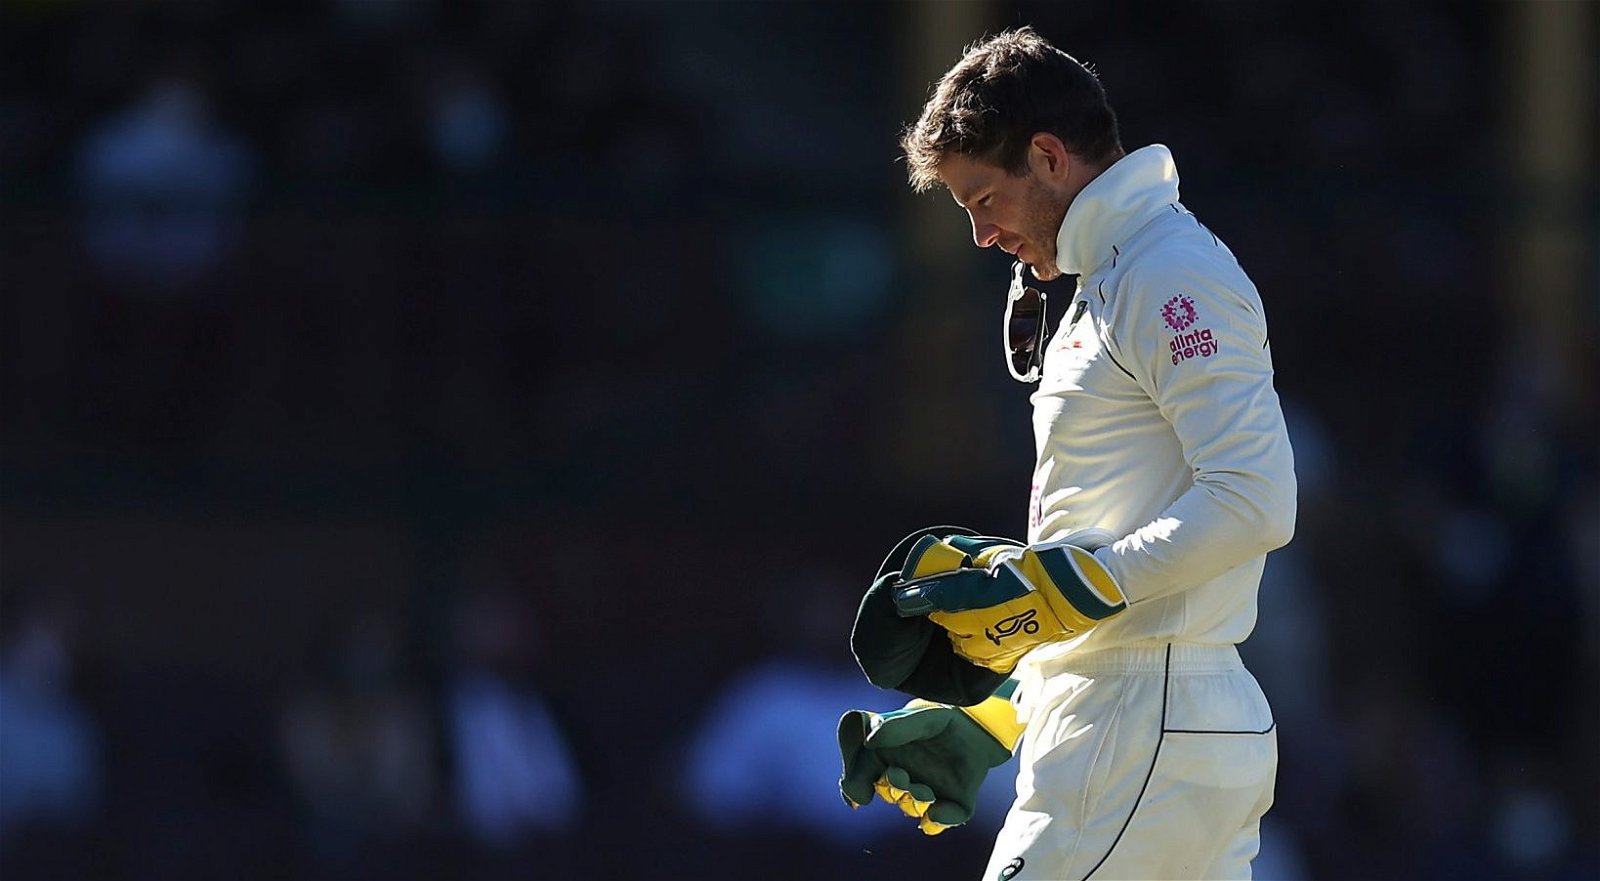 'Statesman' Mask Slips As Tim Paine Nears The End Of His Tenure